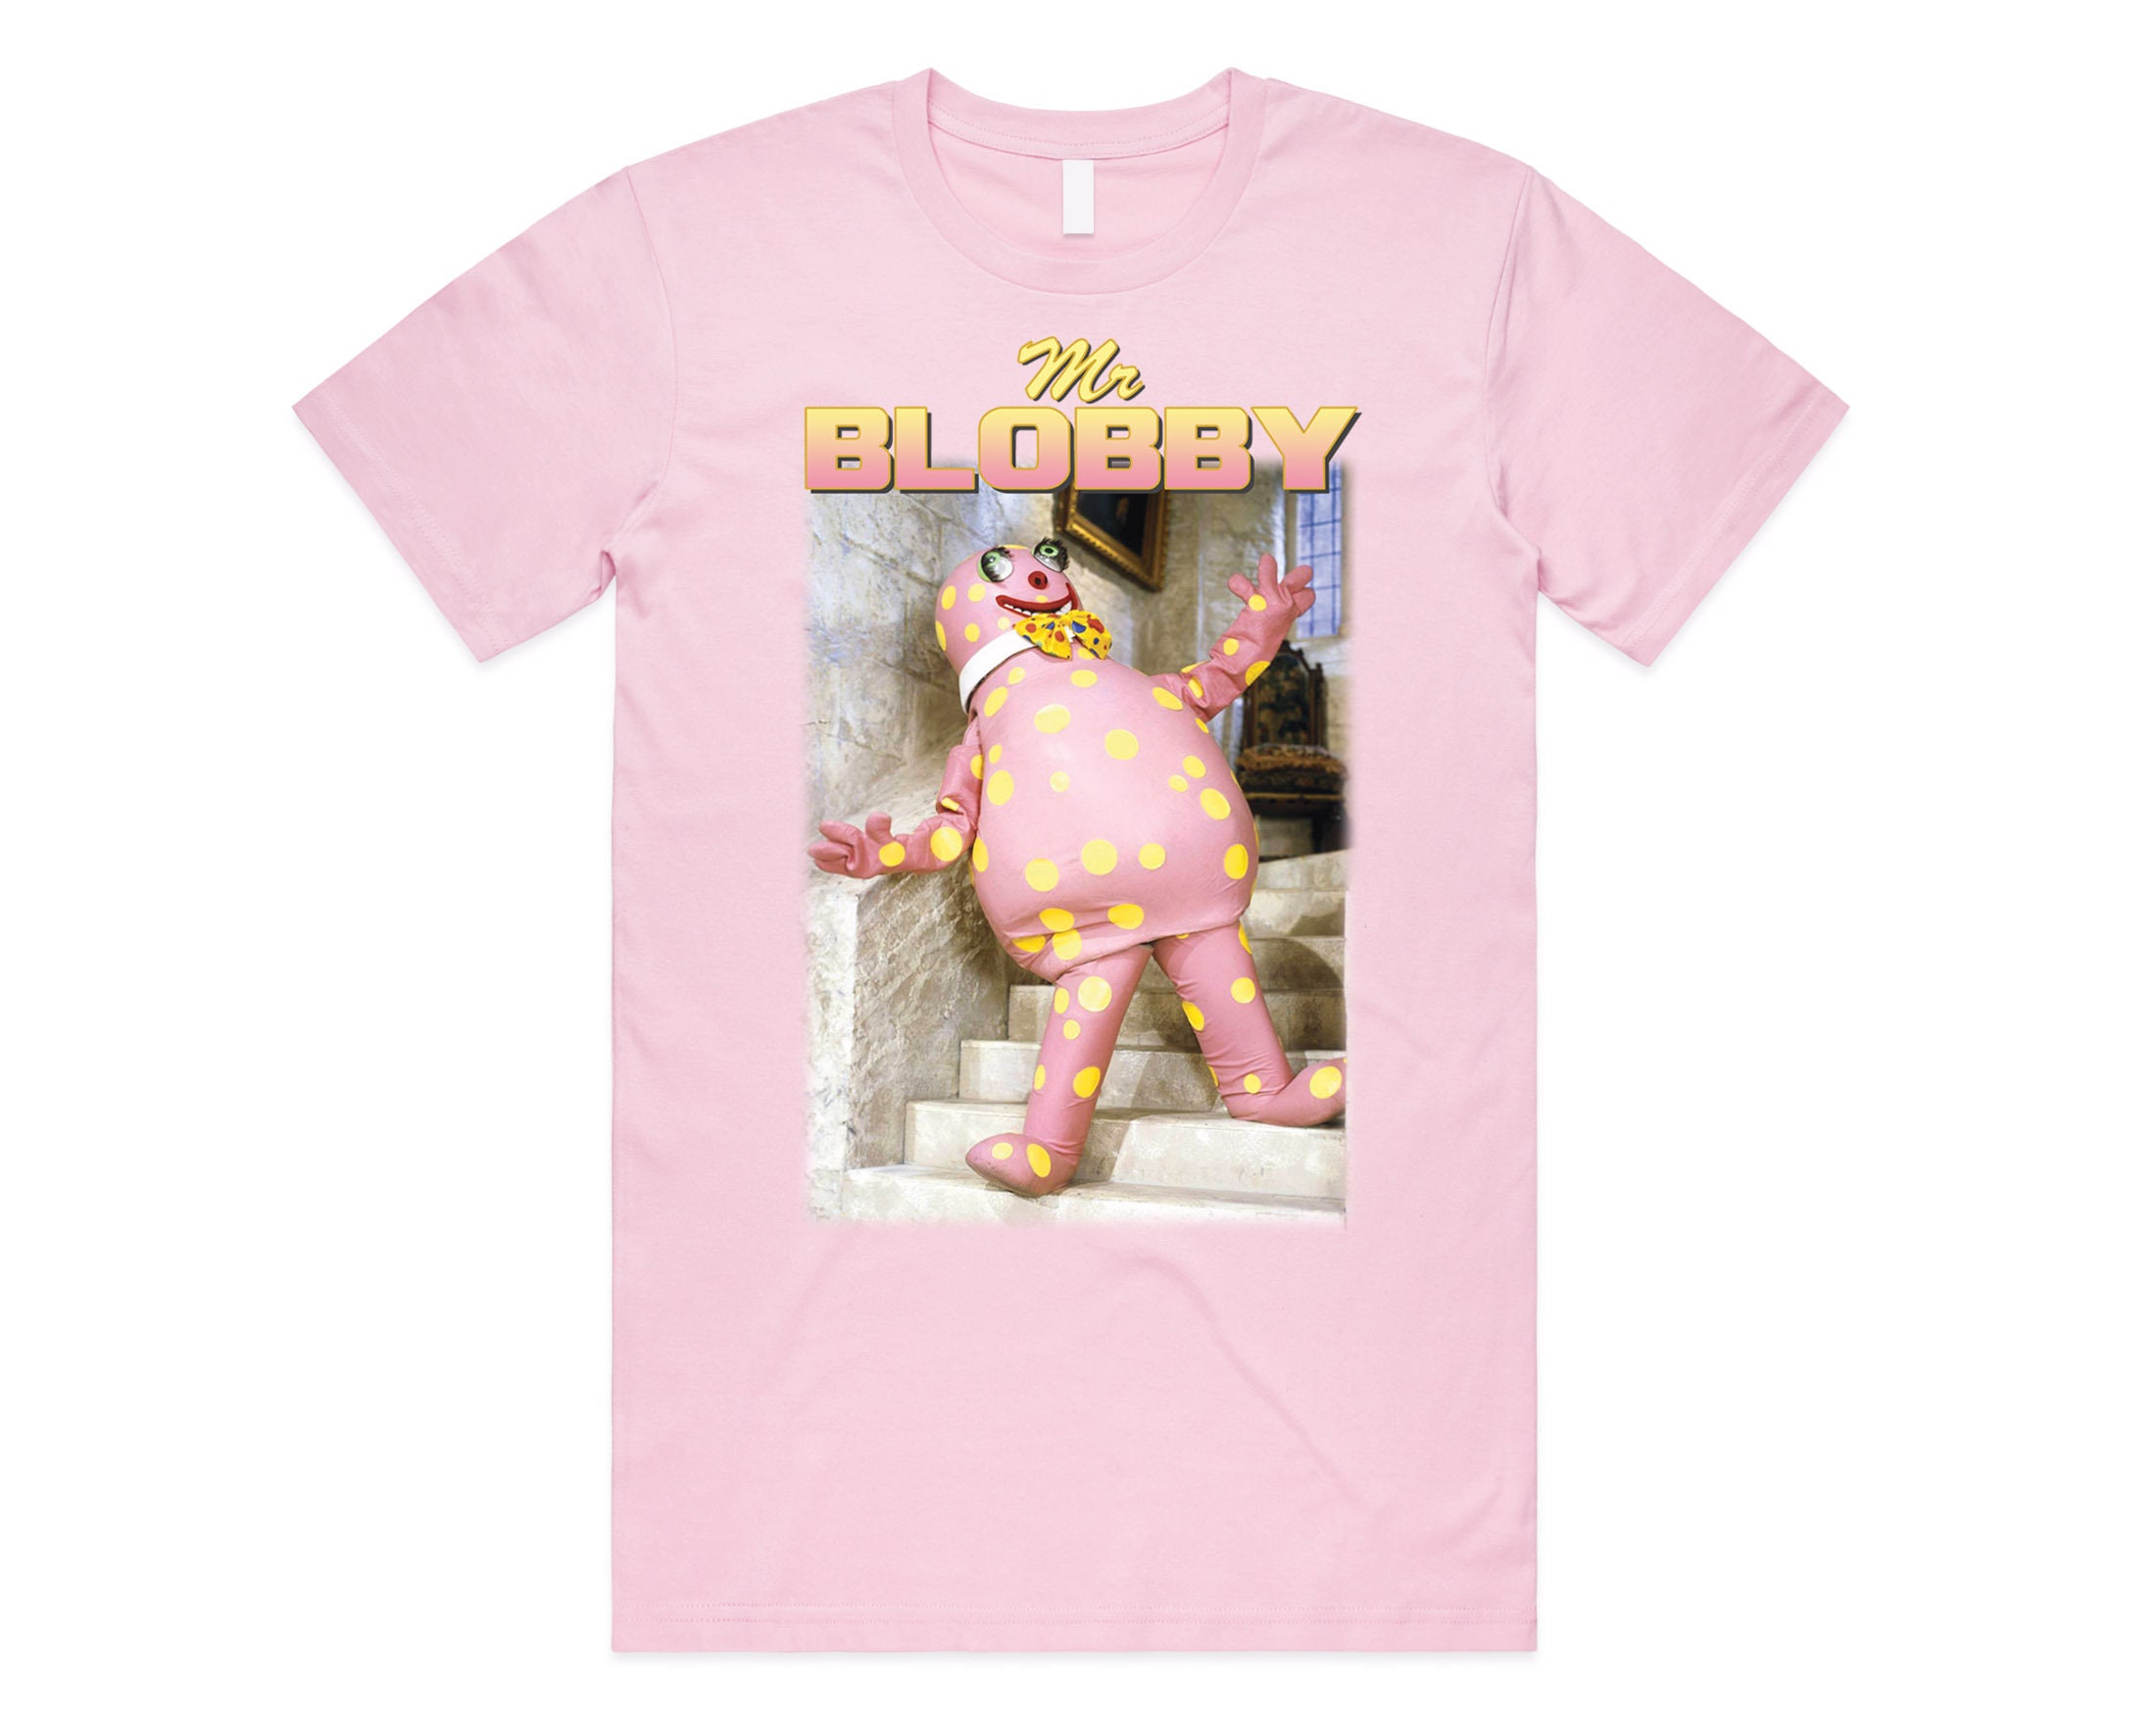 Mr Blobby Homage T-Shirt Tee Top Funny UK Tribute Gift For Tv 90’s Icon Legend Noel